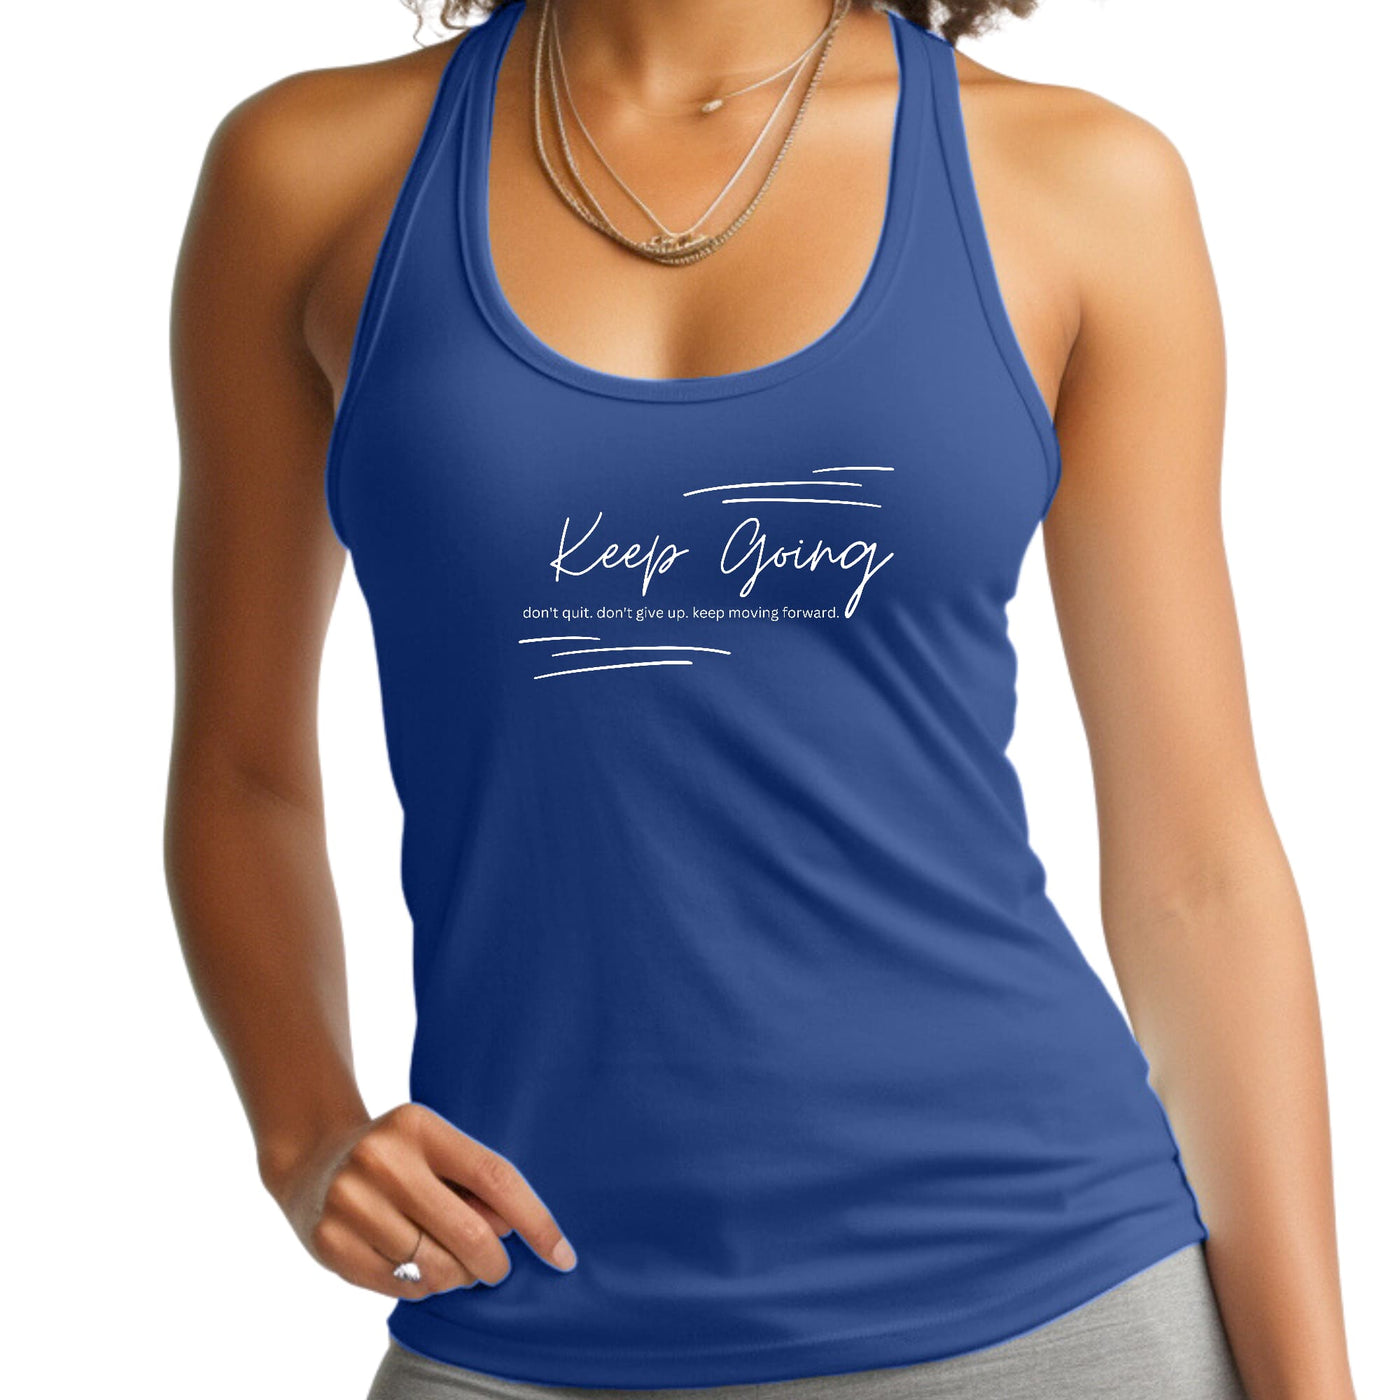 Womens Fitness Tank Top Graphic T-shirt Keep Going Don’t Give Up - Womens